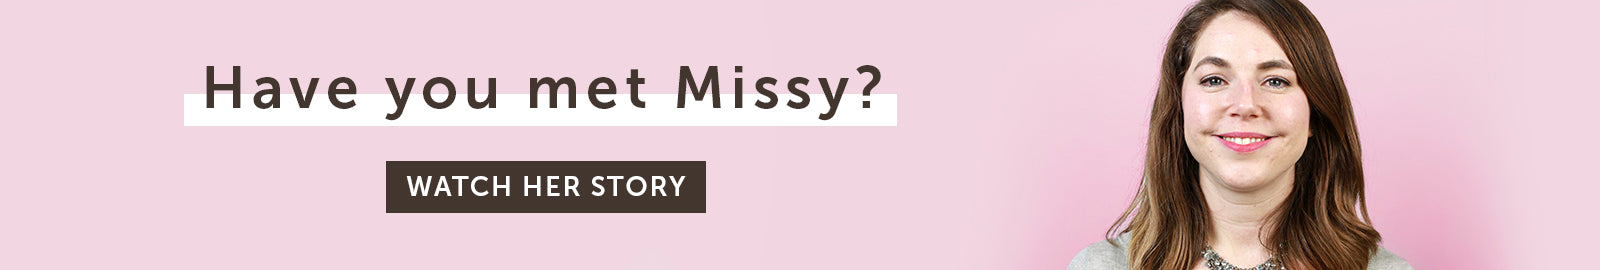 Have you met Missy? Watch her story.